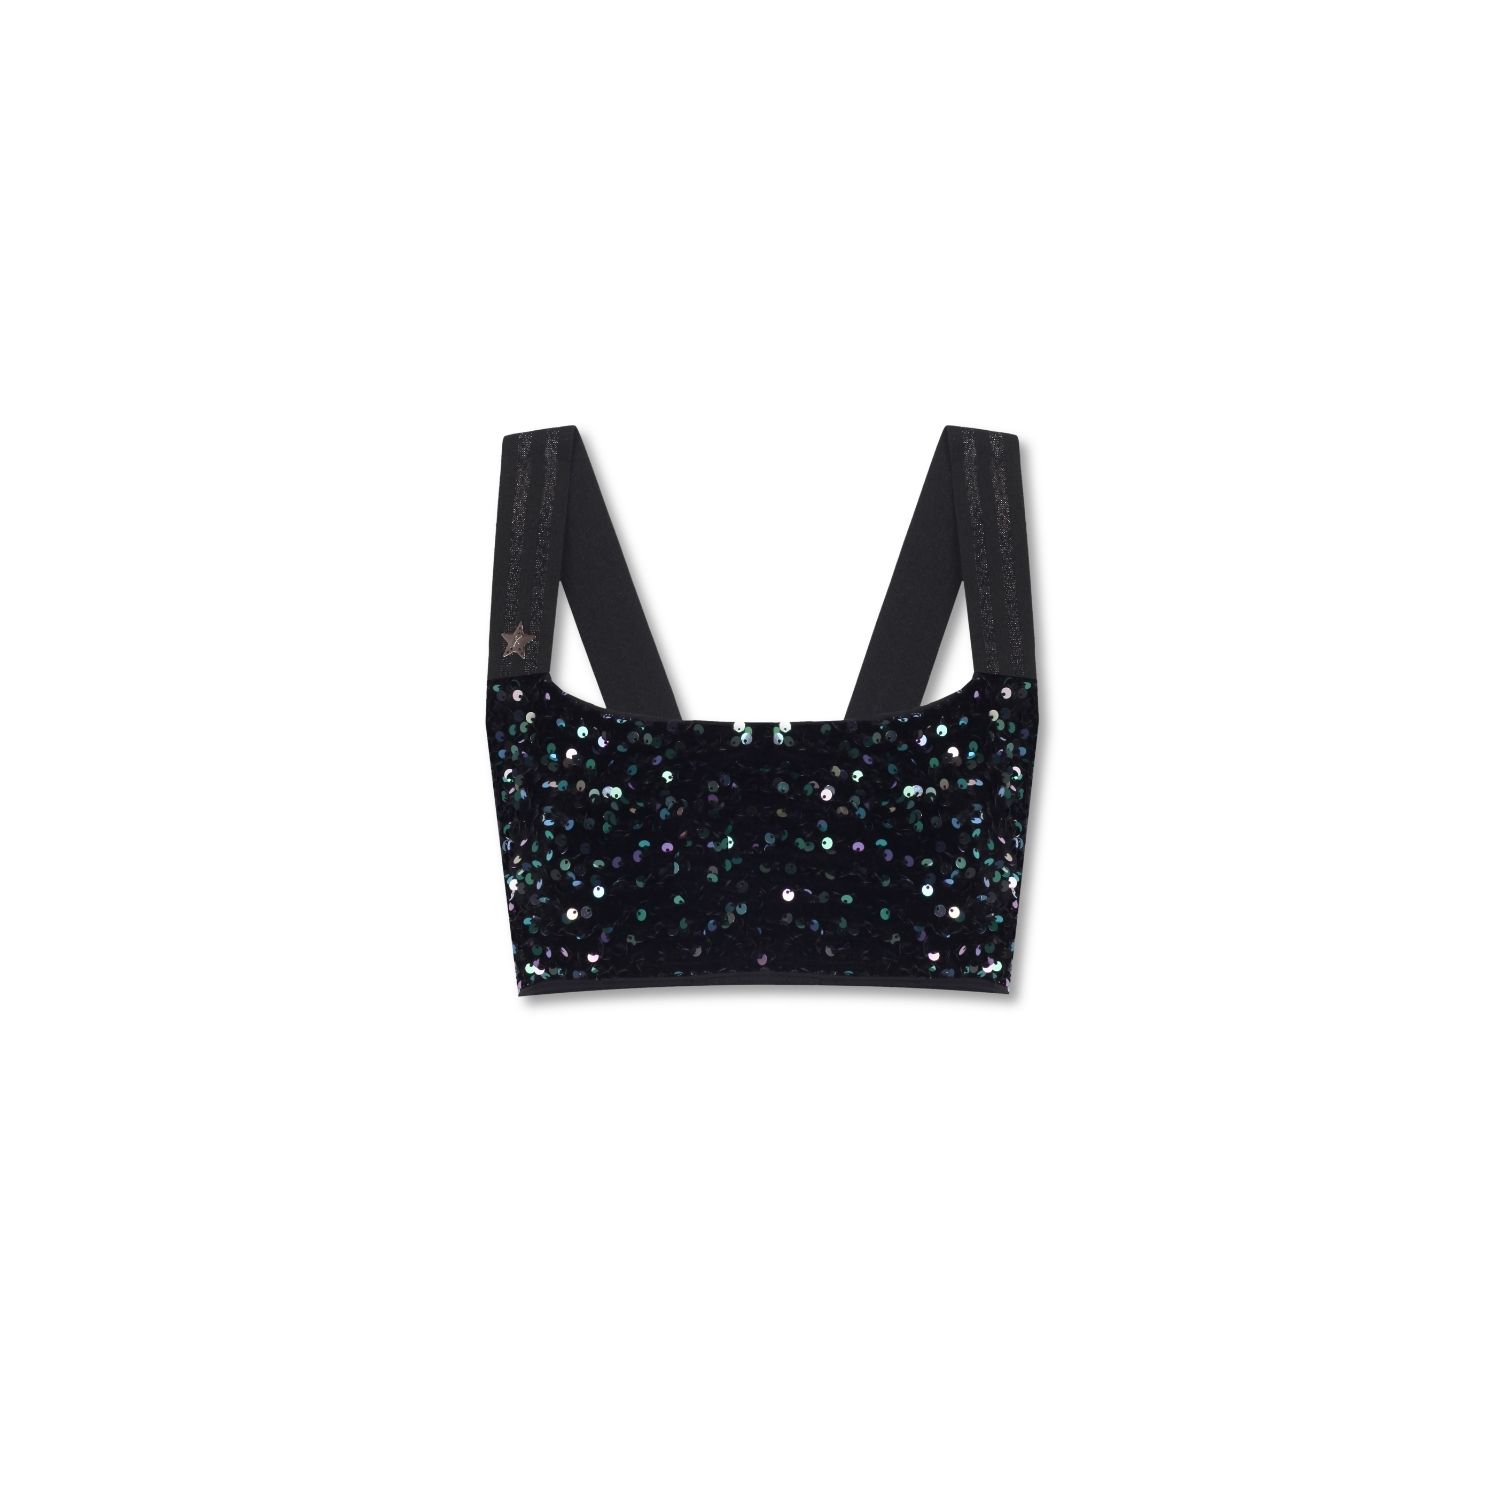 Sequined Bralette, Yorstruly